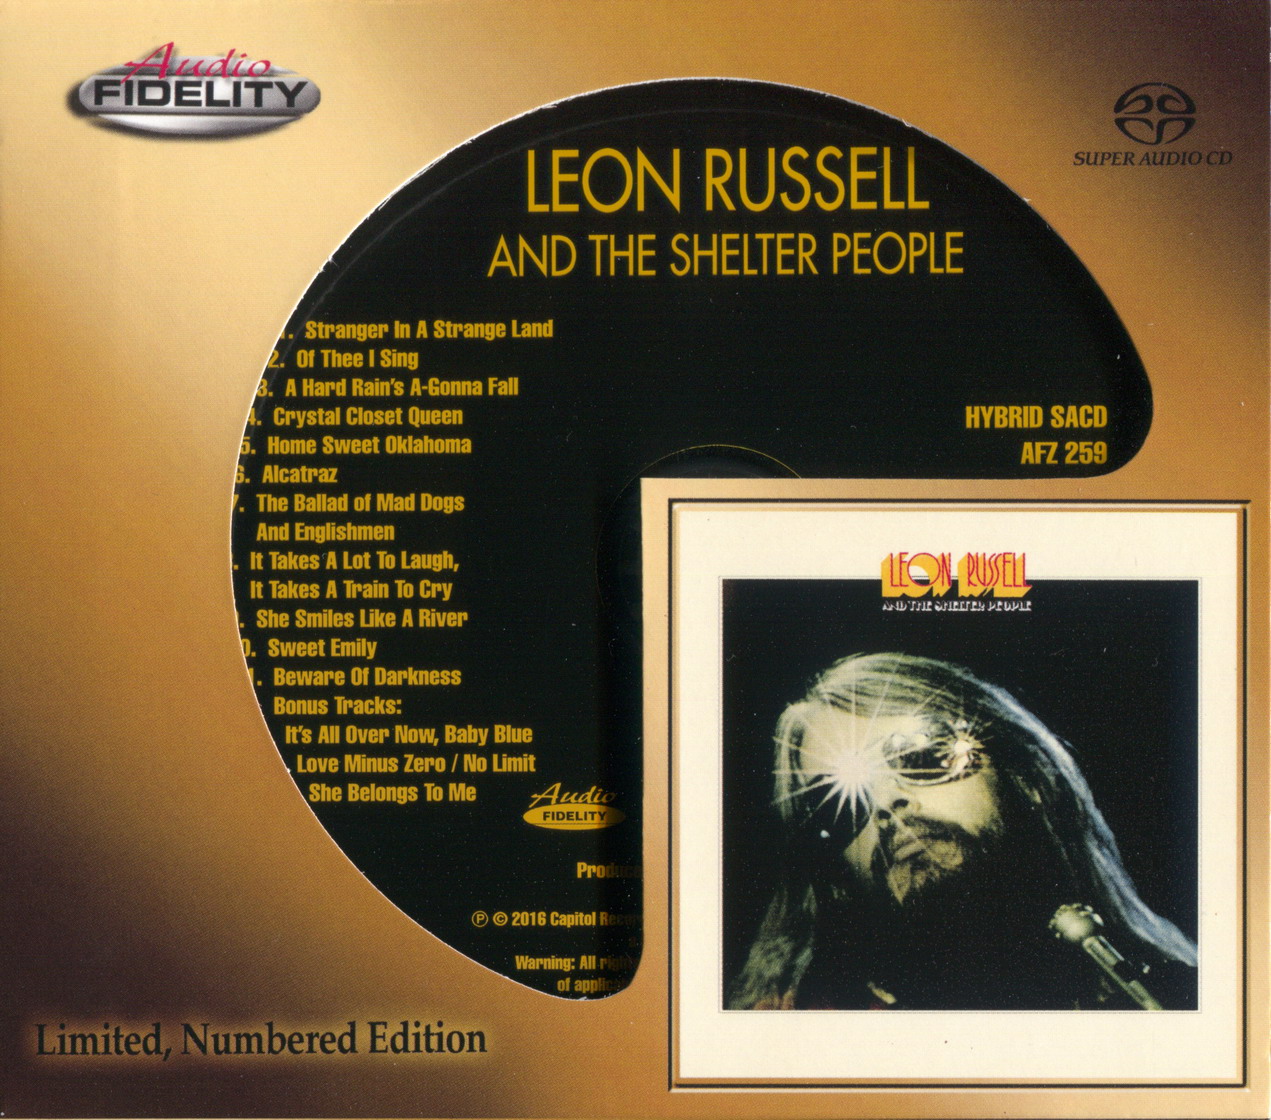 Leon Russell – Leon Russell And The Shelter People (1971) [Audio Fidelity 2016] SACD ISO